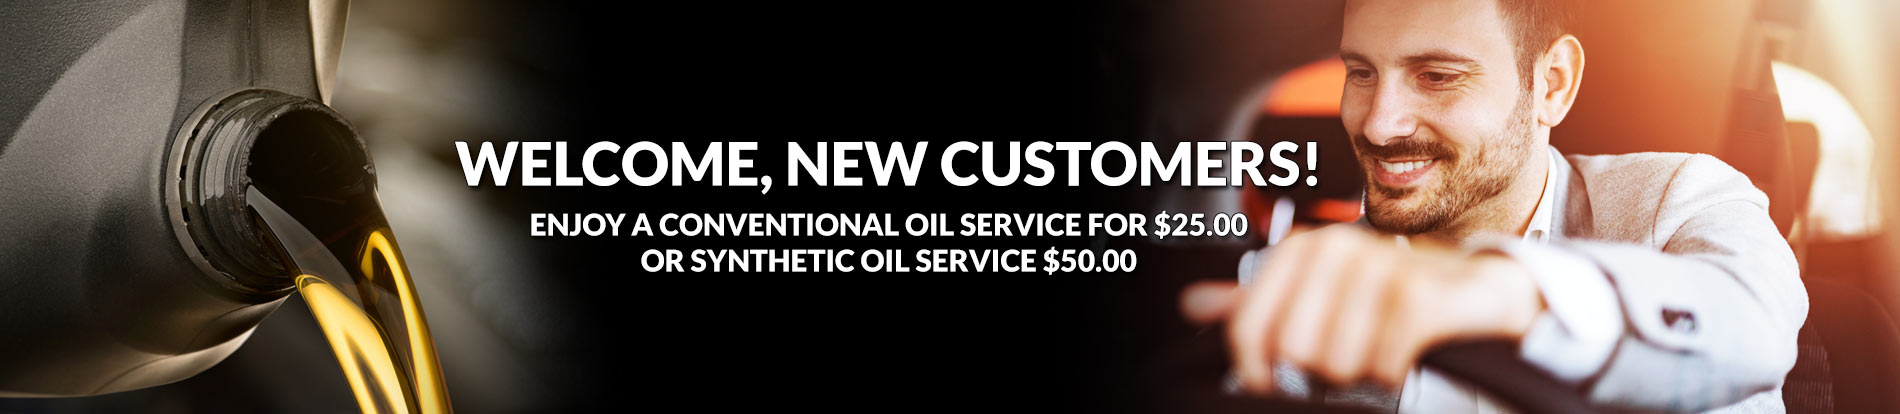  Welcome, new customers: enjoy a conventional oil service